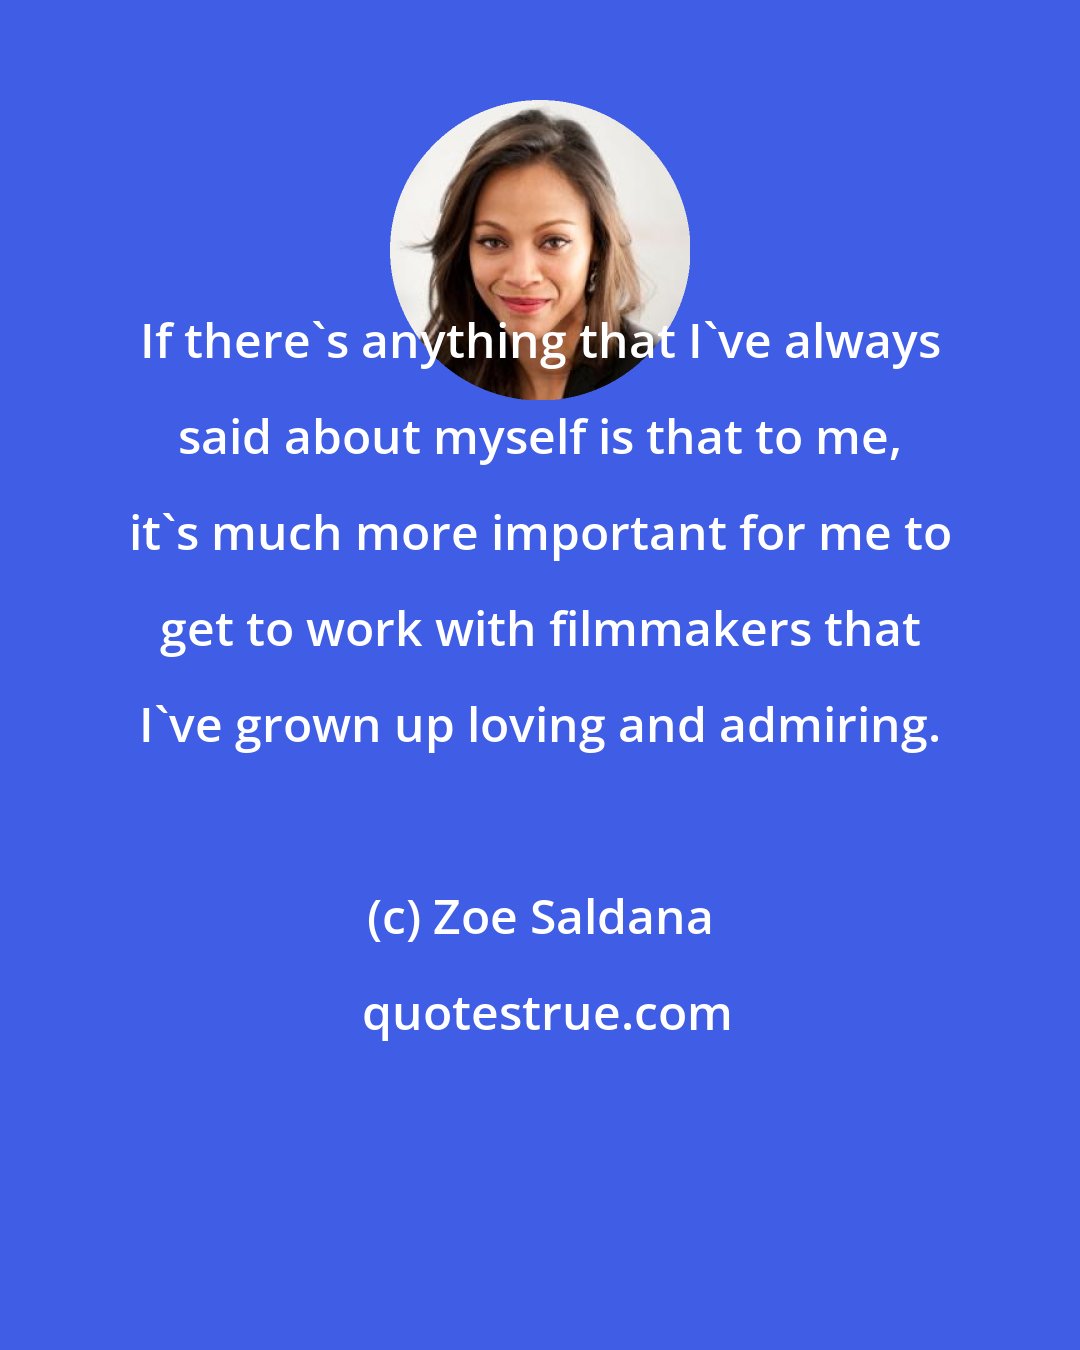 Zoe Saldana: If there's anything that I've always said about myself is that to me, it's much more important for me to get to work with filmmakers that I've grown up loving and admiring.